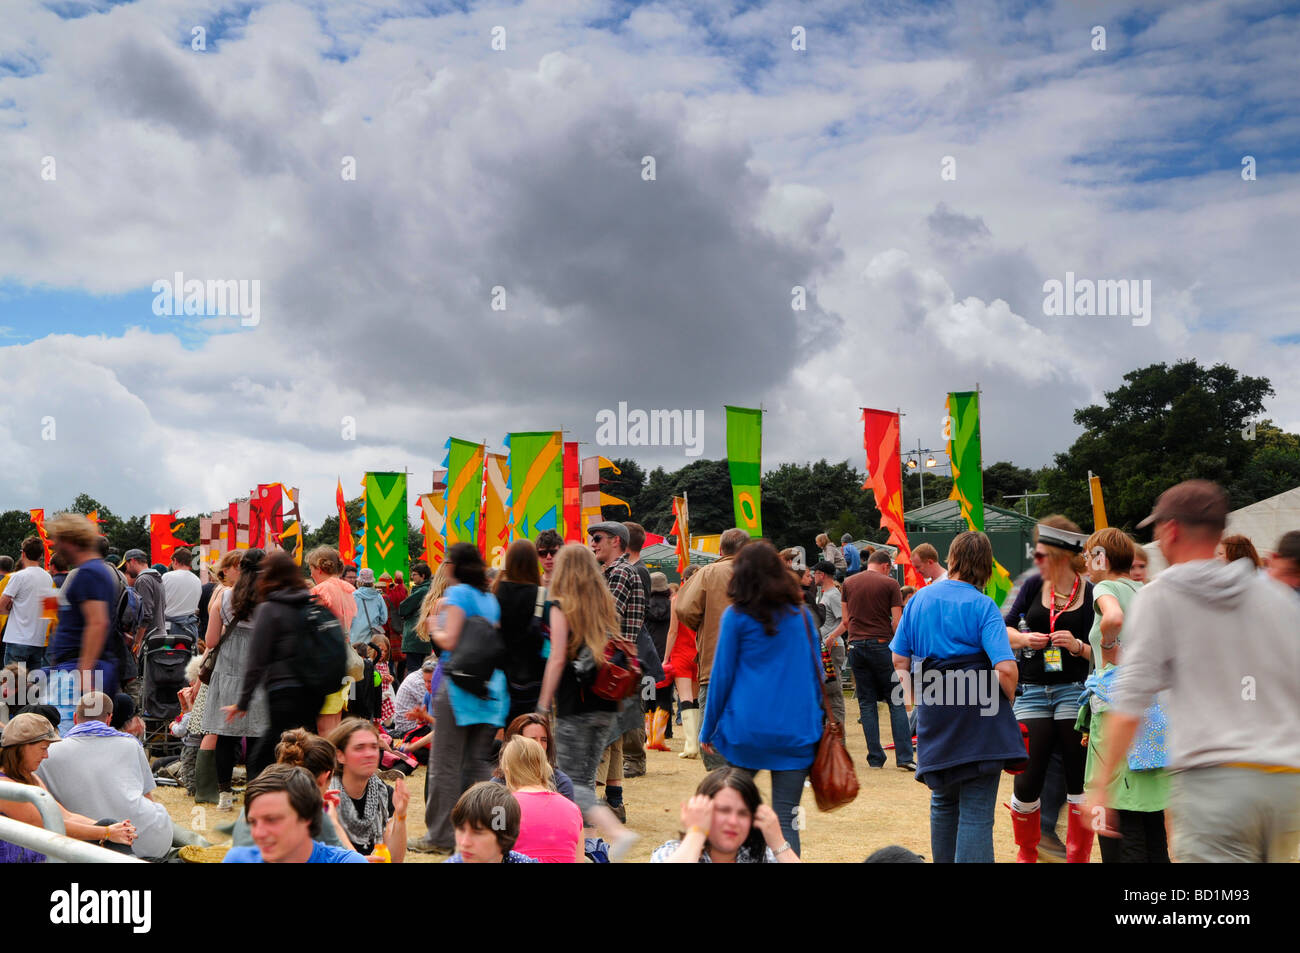 Crowds and flags Latitude Music Festival, UK Stock Photo